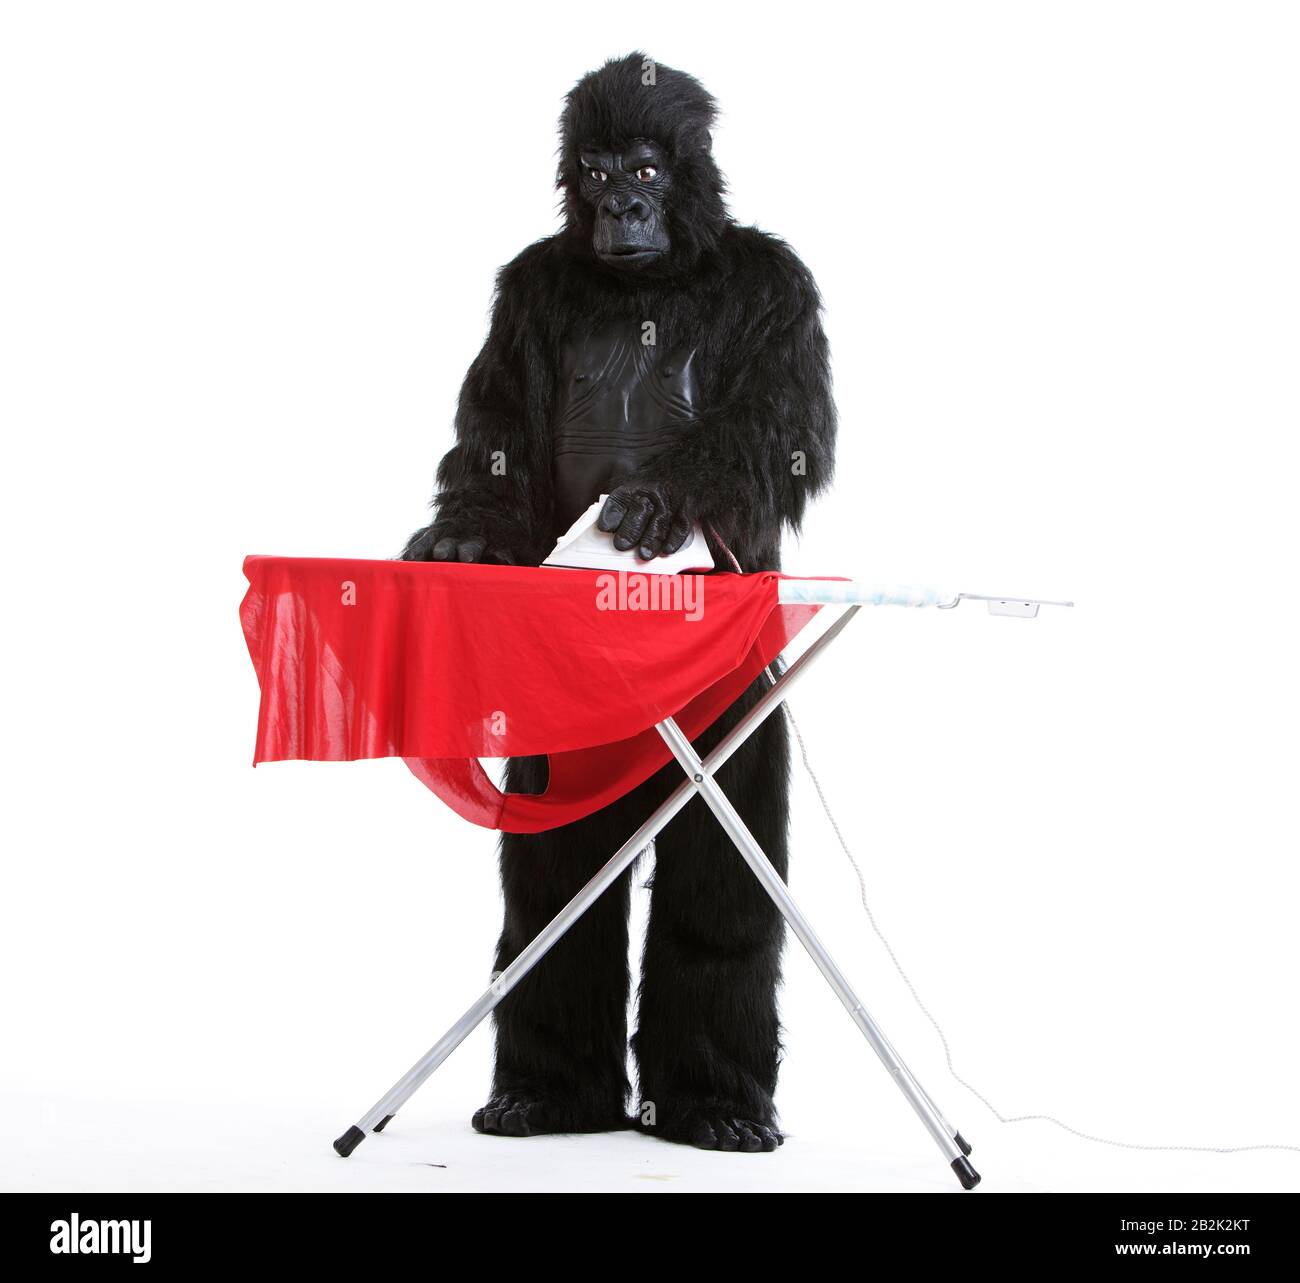 Young man in gorilla costume ironing red cloth against white background Stock Photo